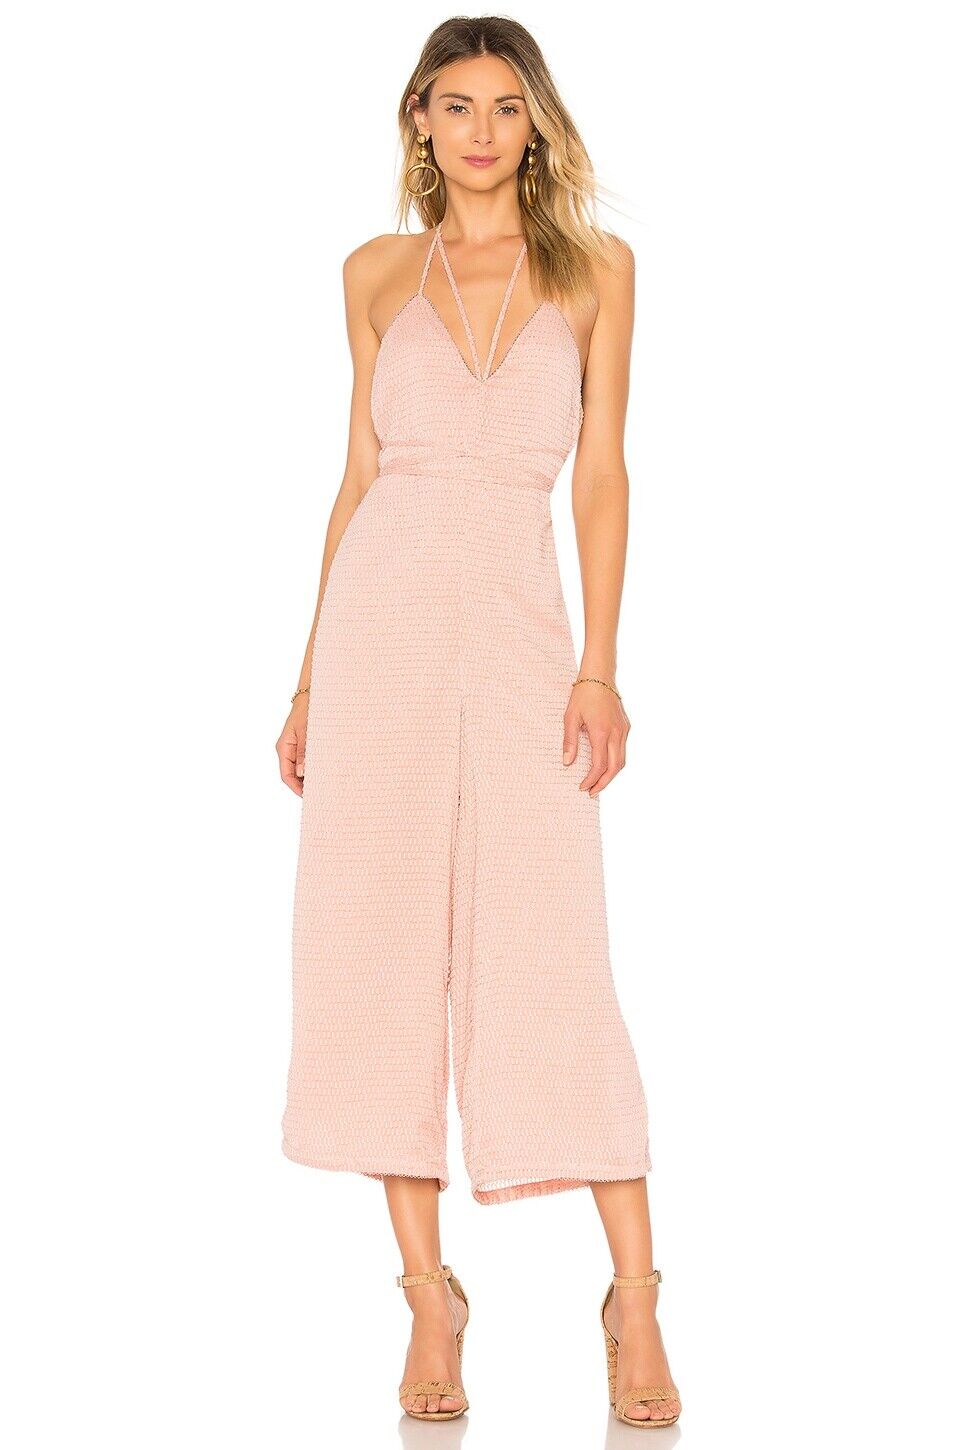 House of Harlow 1960 x REVOLVE Paola Jumpsuit in Rose